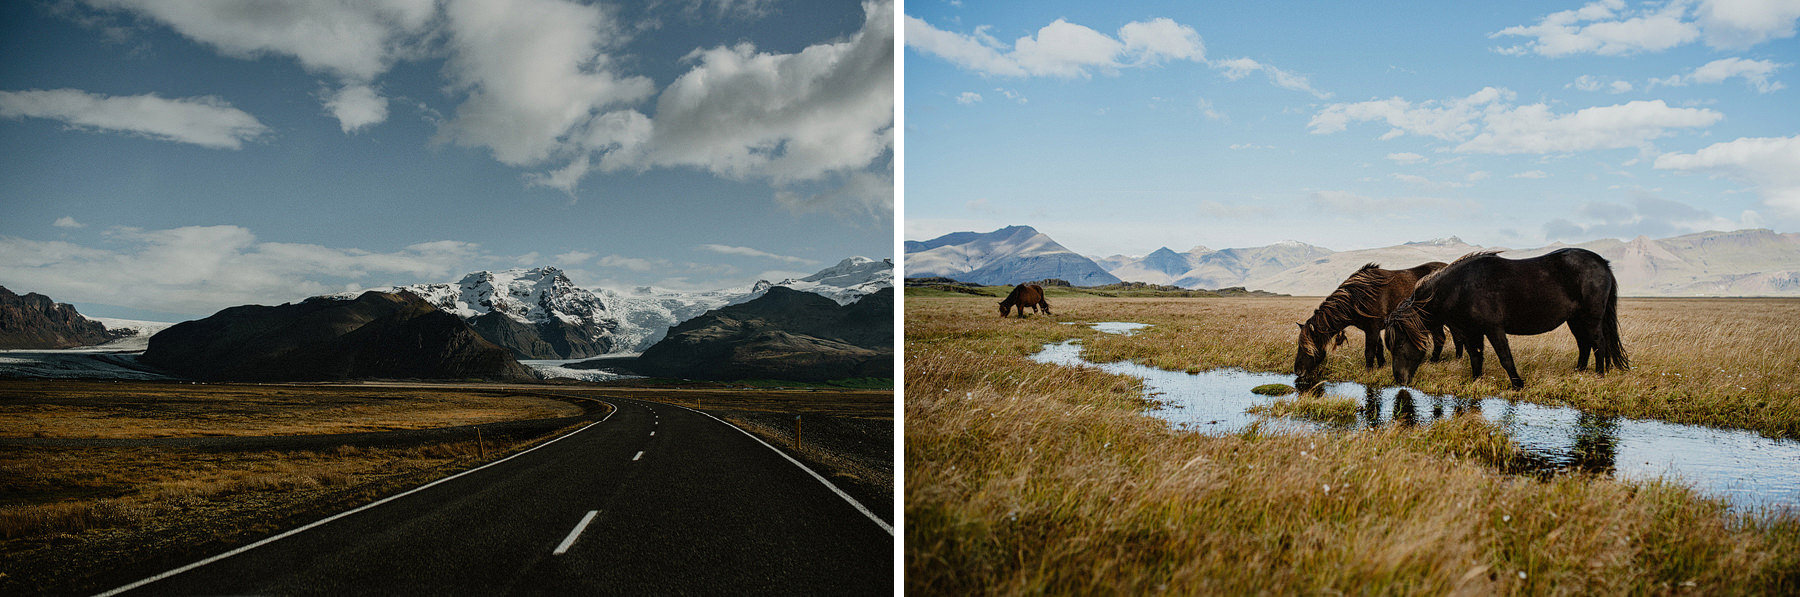 iceland complete road trip itinerary